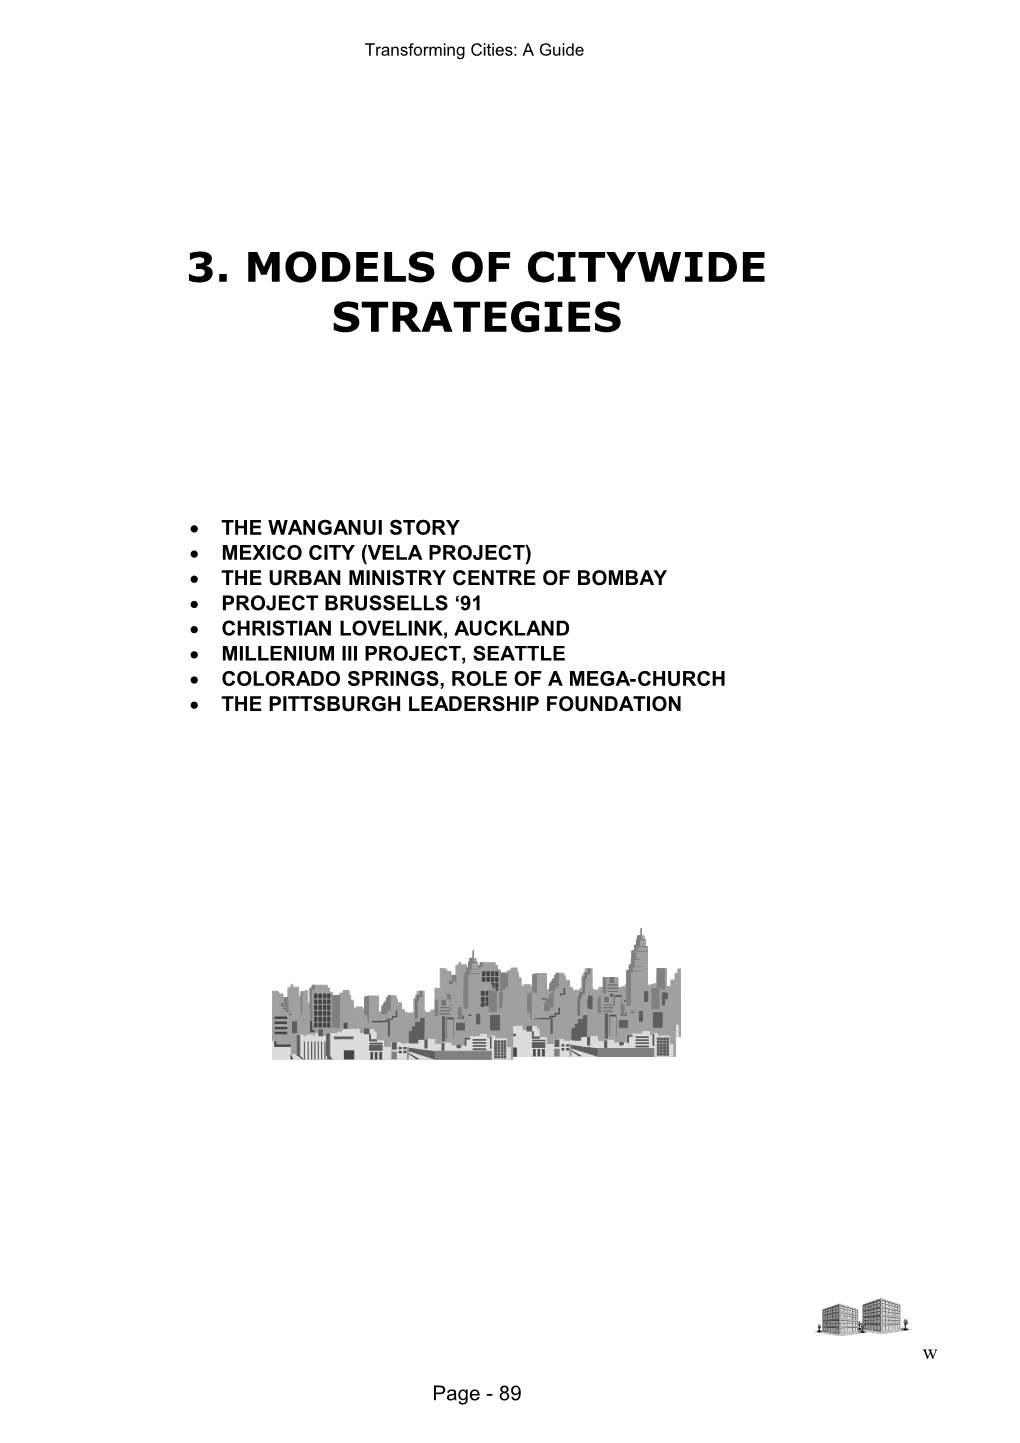 3. Models of Citywide